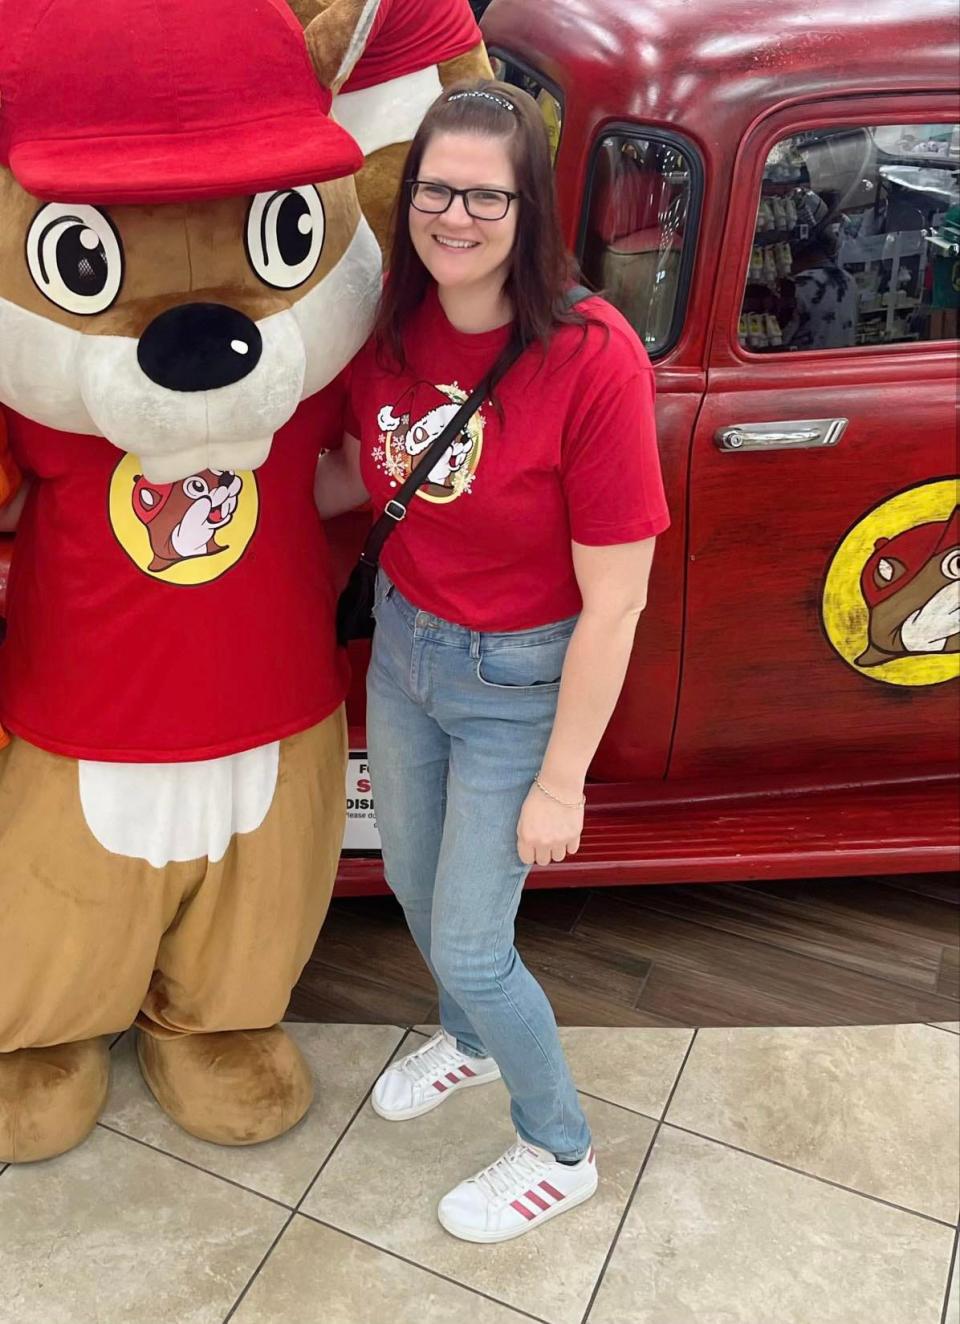 Laura Amy, a communications and marketing employee for Texas Snax, poses with a Buc-ee's mascot in Texas. Texas Snax is an online reseller of Buc-ee's merchandise. The Dallas, Texas-based company is not affiliated with Buc-ee's.